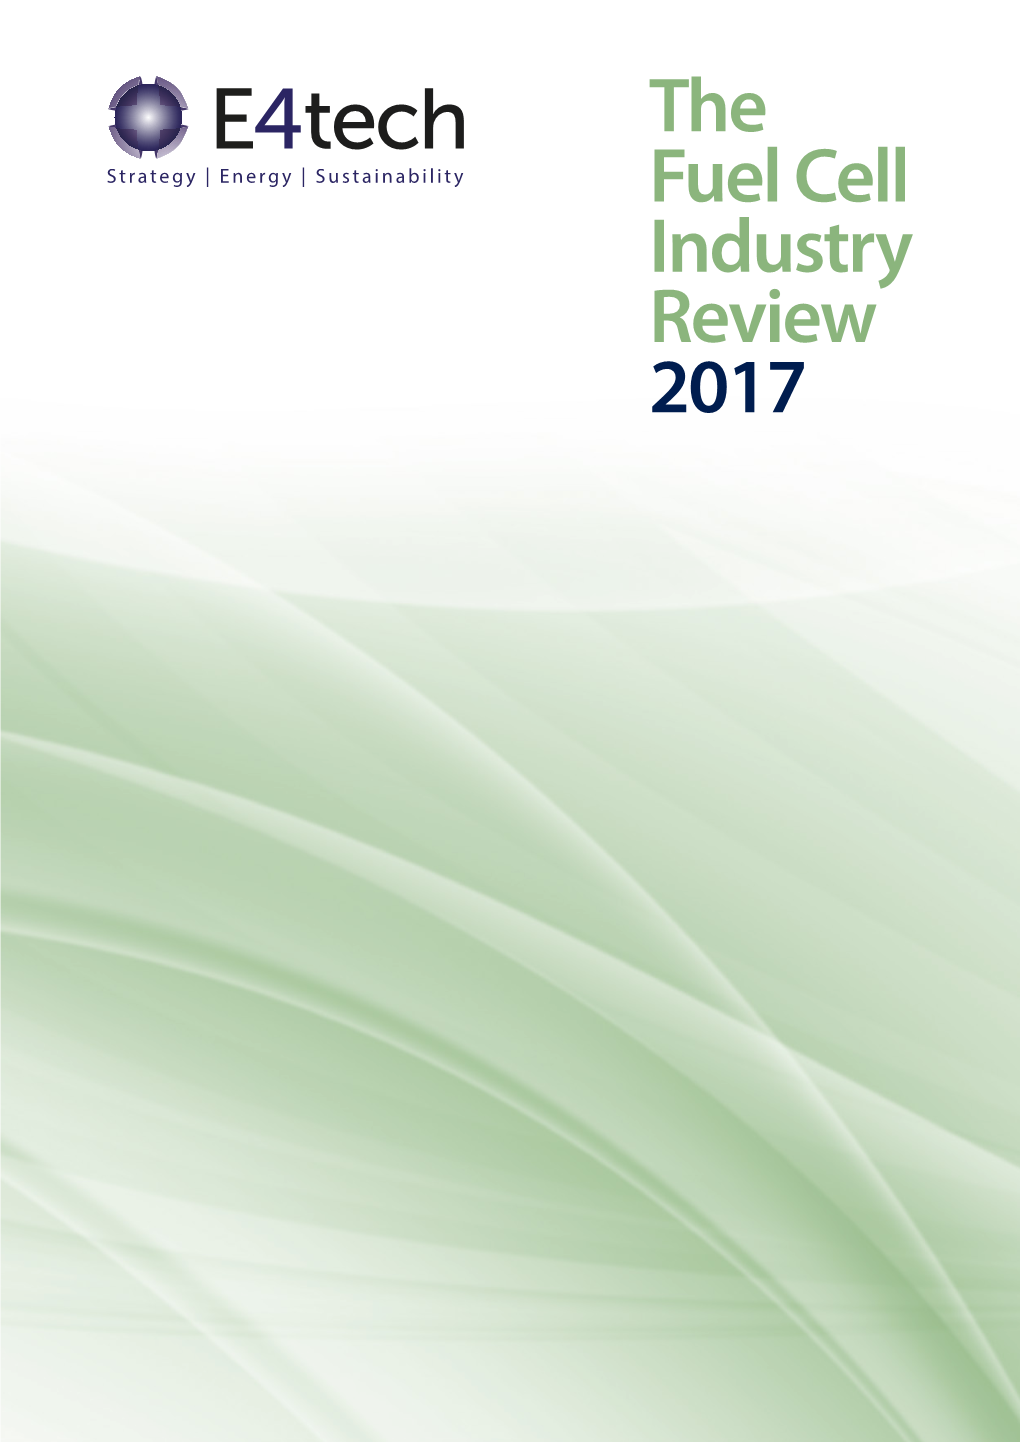 The Fuel Cell Industry Review 2017